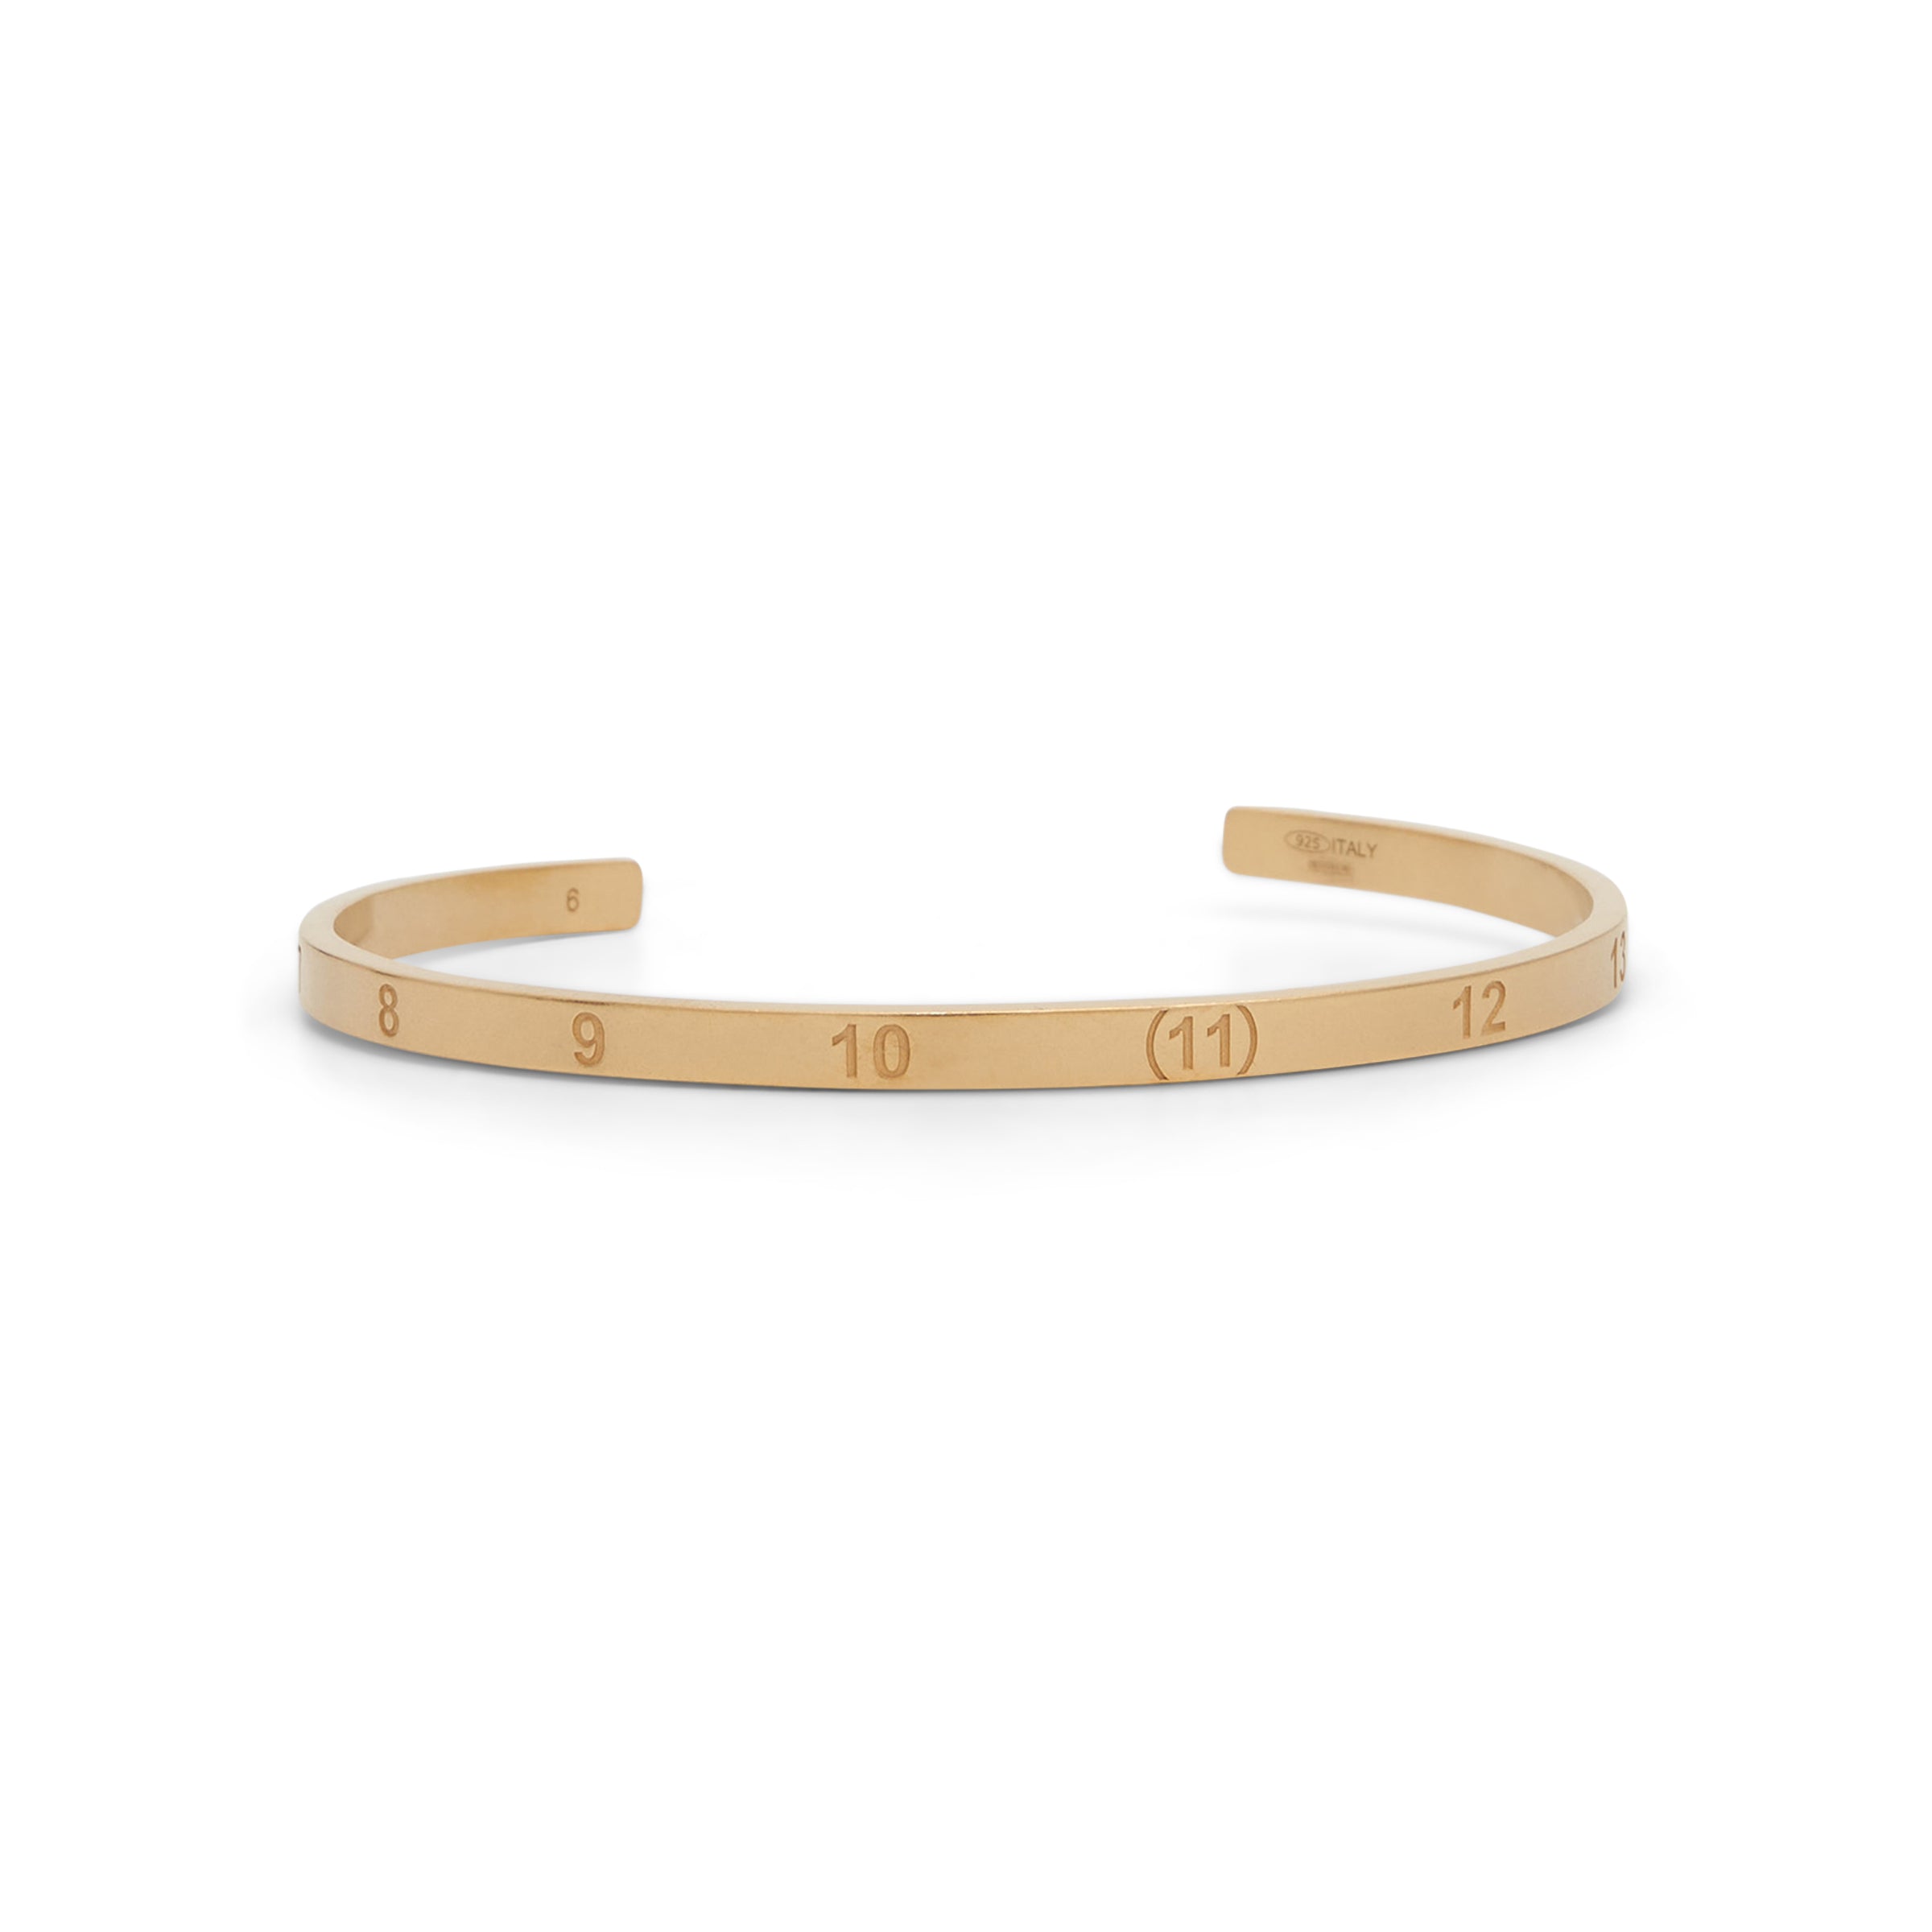 Numerical Cuff 4mm Bracelet in Yellow Gold